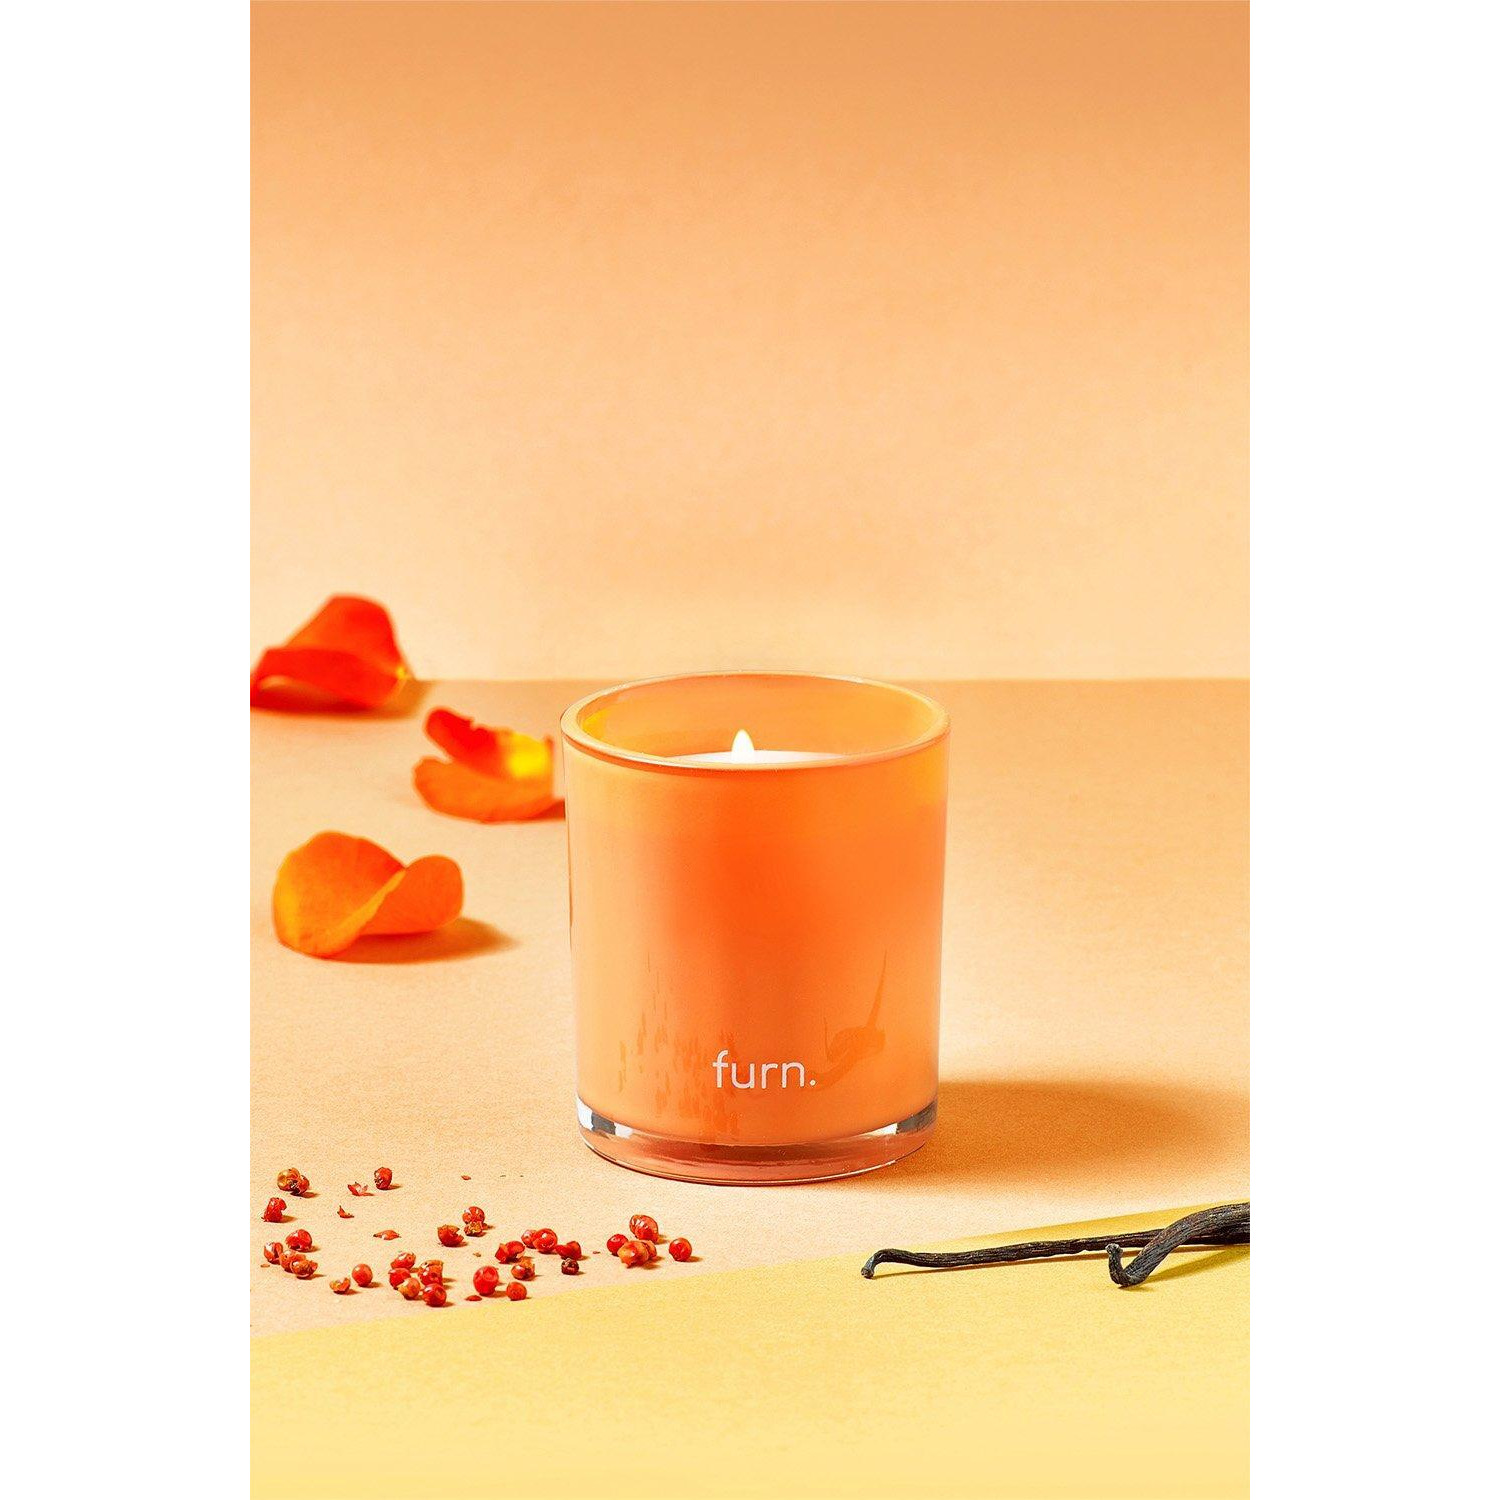 Kindred Bergamont, Berry, Vanilla & Patchouli Scented Glass Candle - image 1